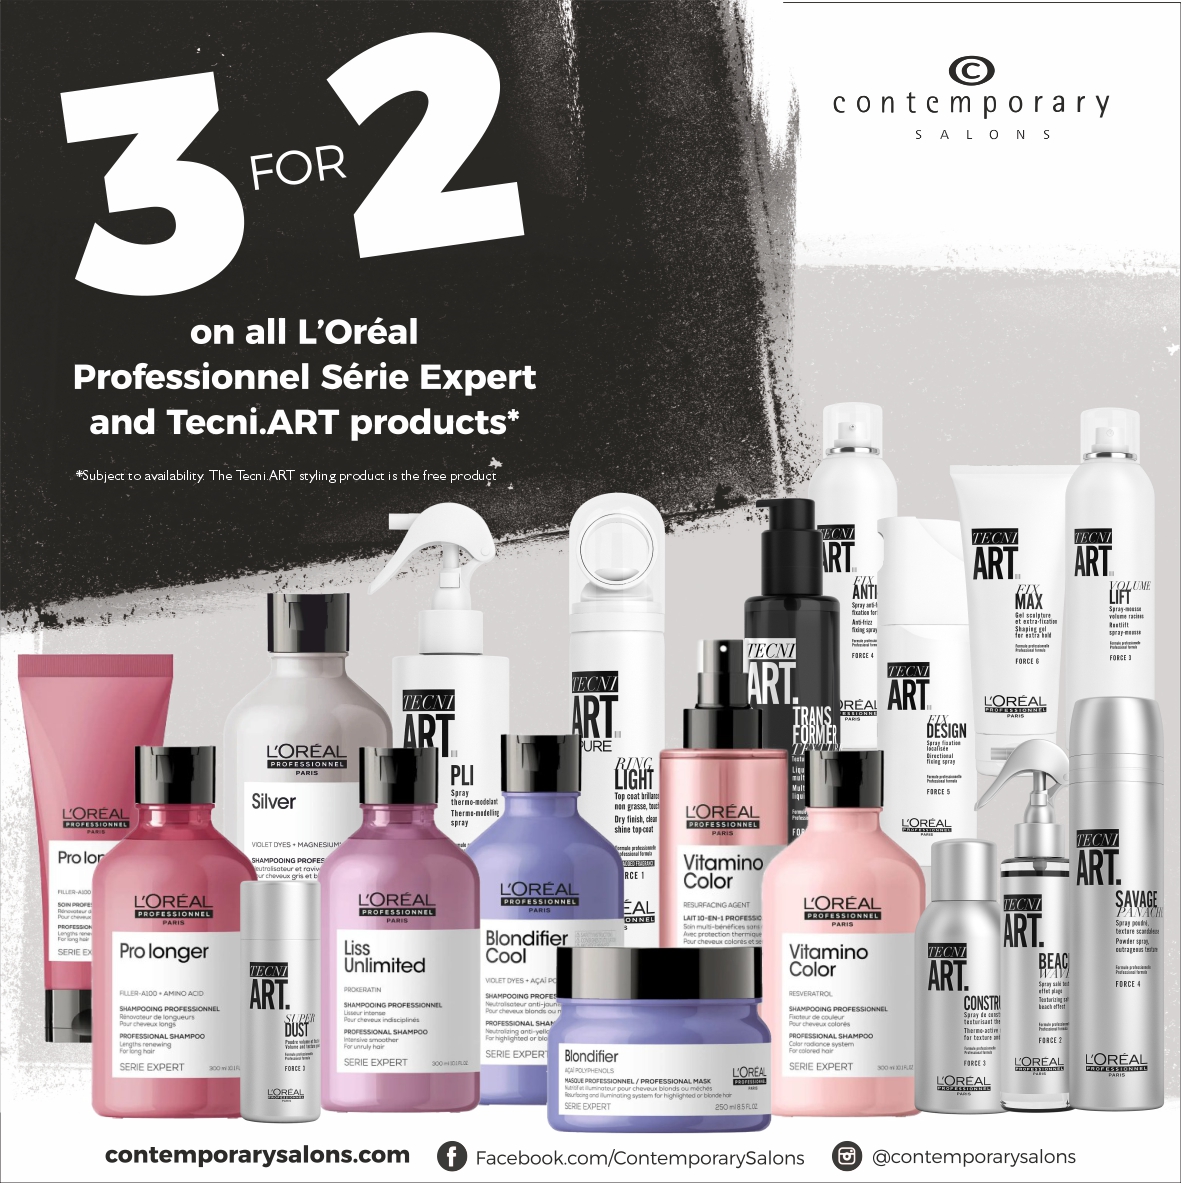 3 For 2 L’Oreal Product Offer